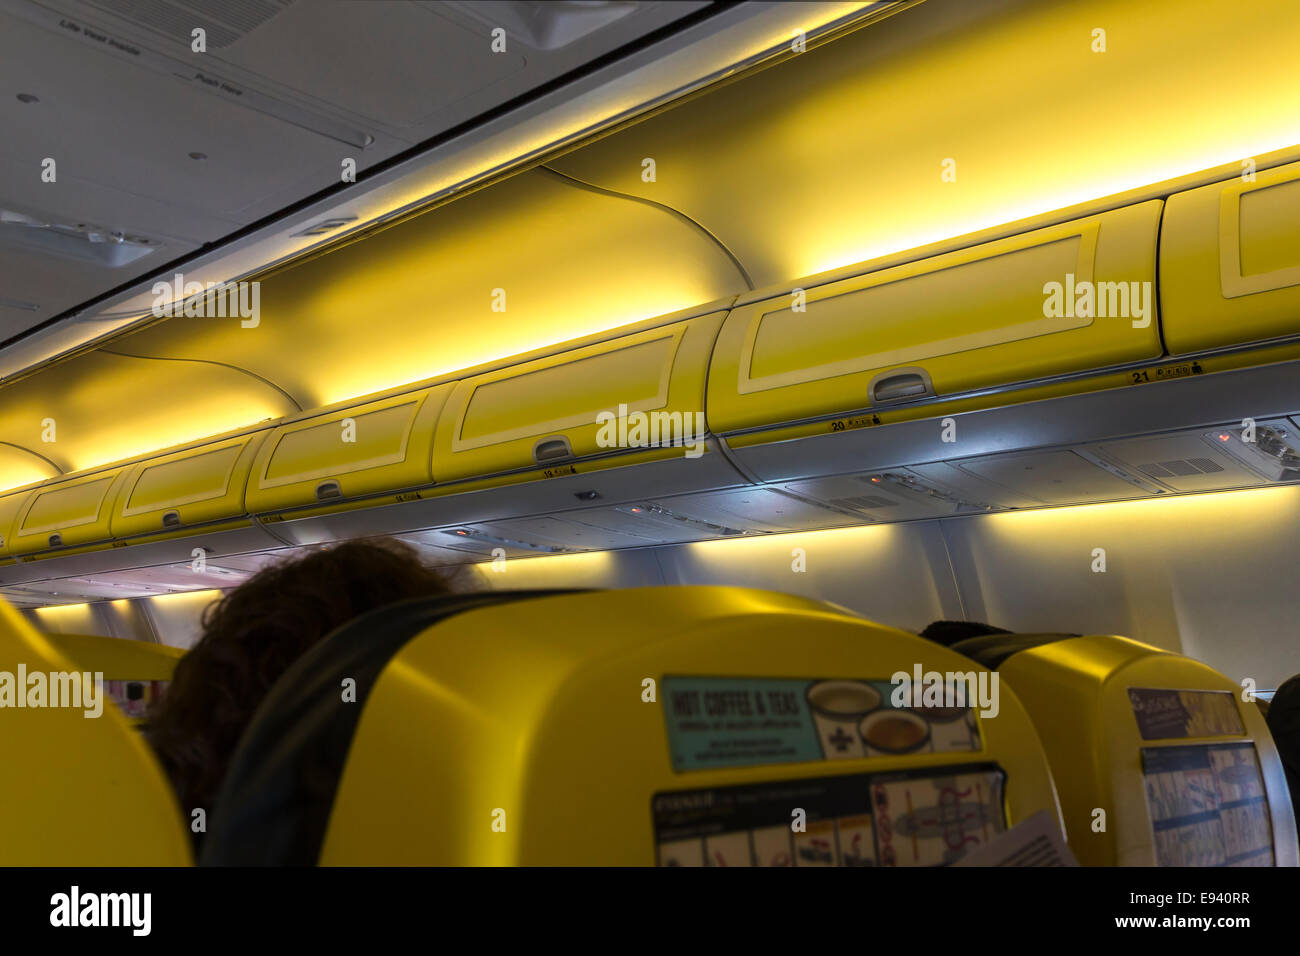 Ryanair Seat High Resolution Stock Photography and Images - Alamy